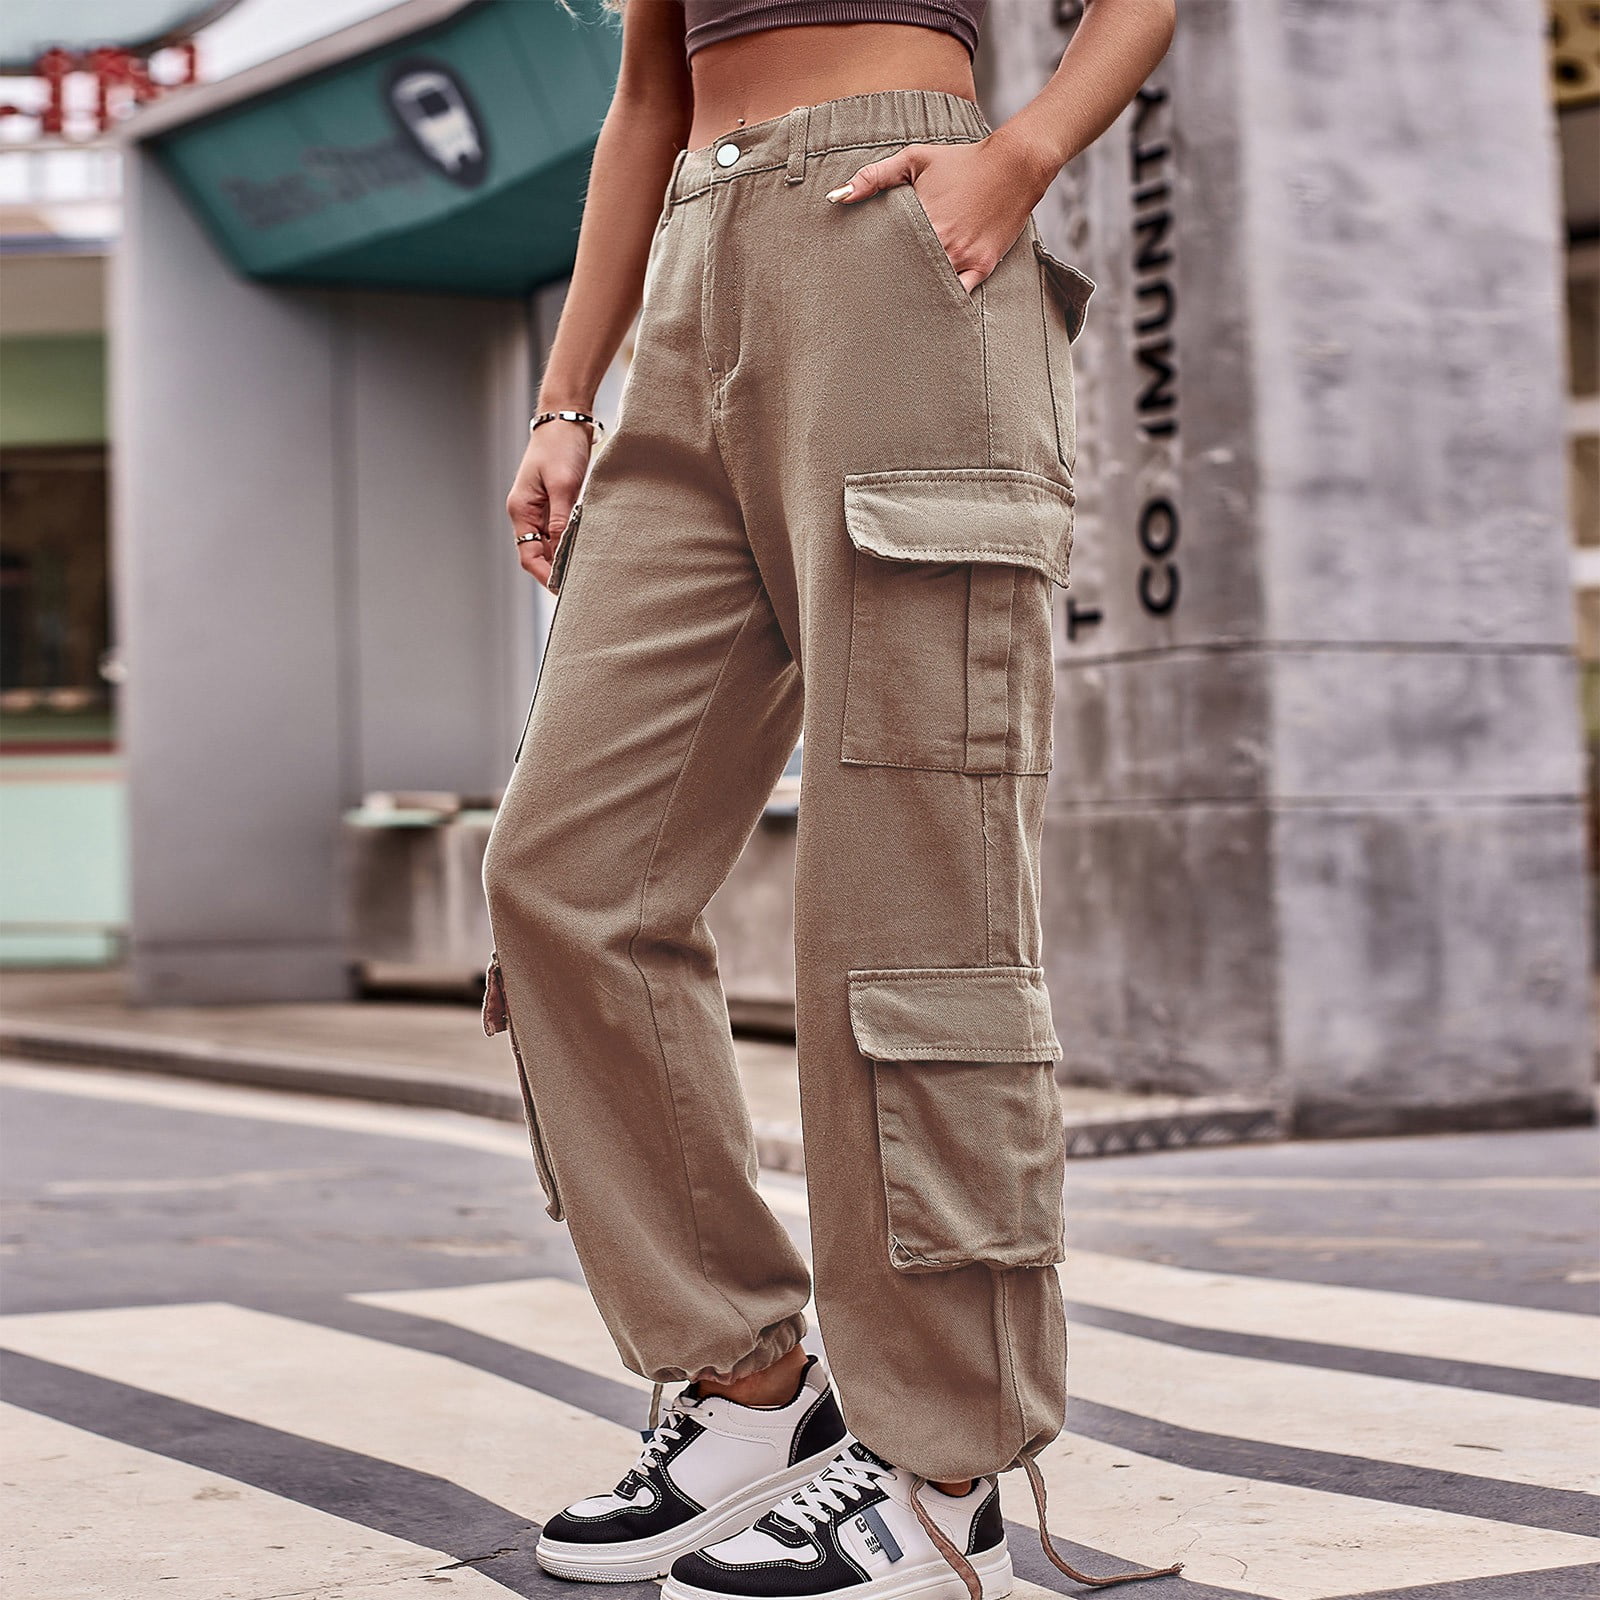 Try the Cargo Pants Trend With These Bestselling Trousers on Sale at Amazon